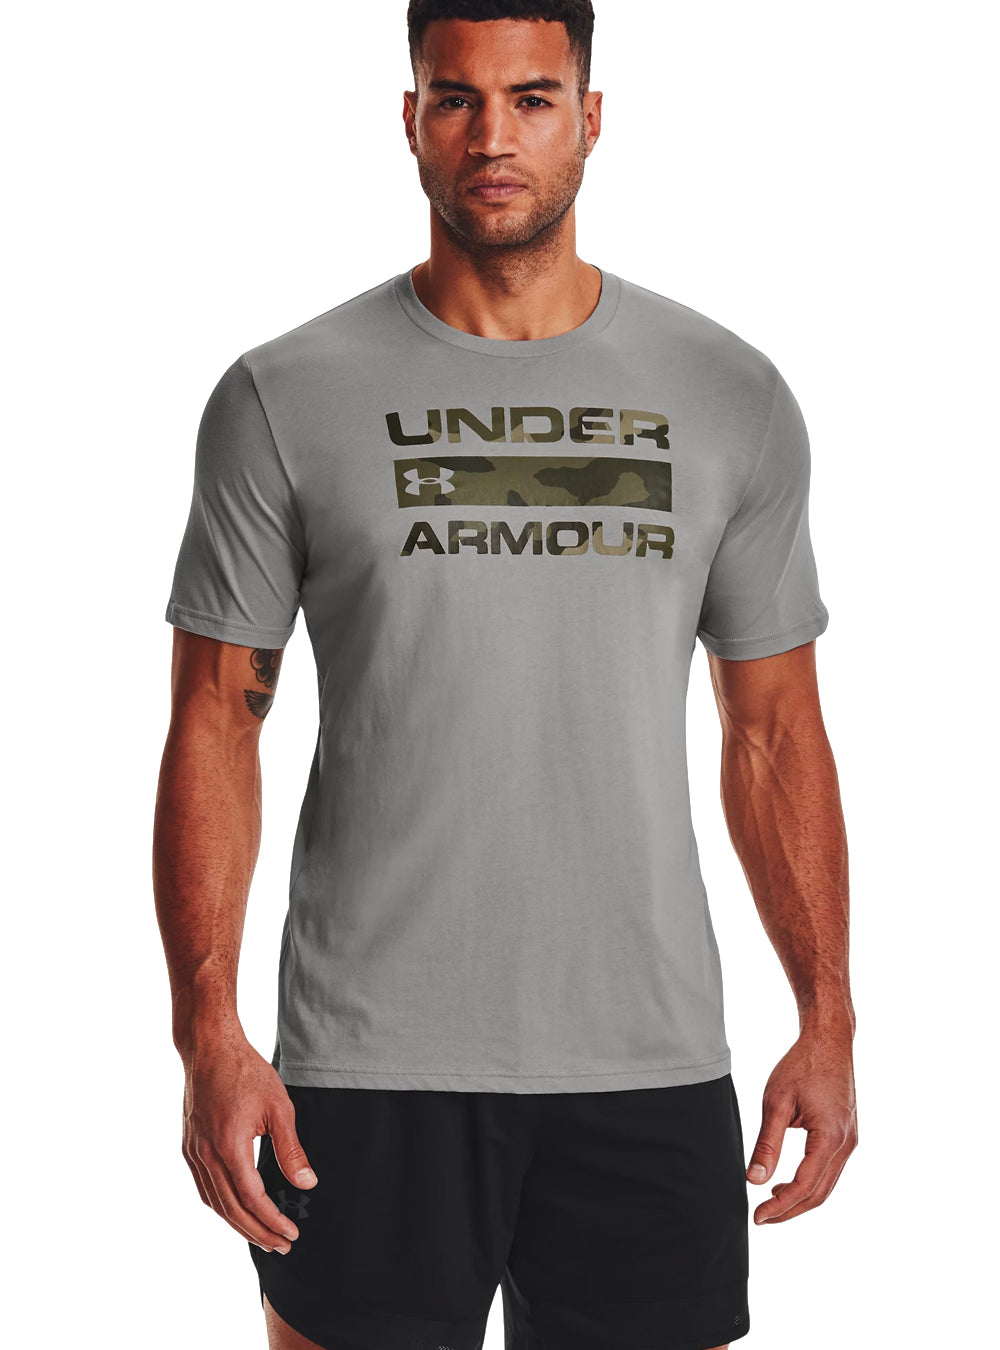 SALE - Under Armour Men's Stacked Logo Fill T-Shirt - Marine OD Green